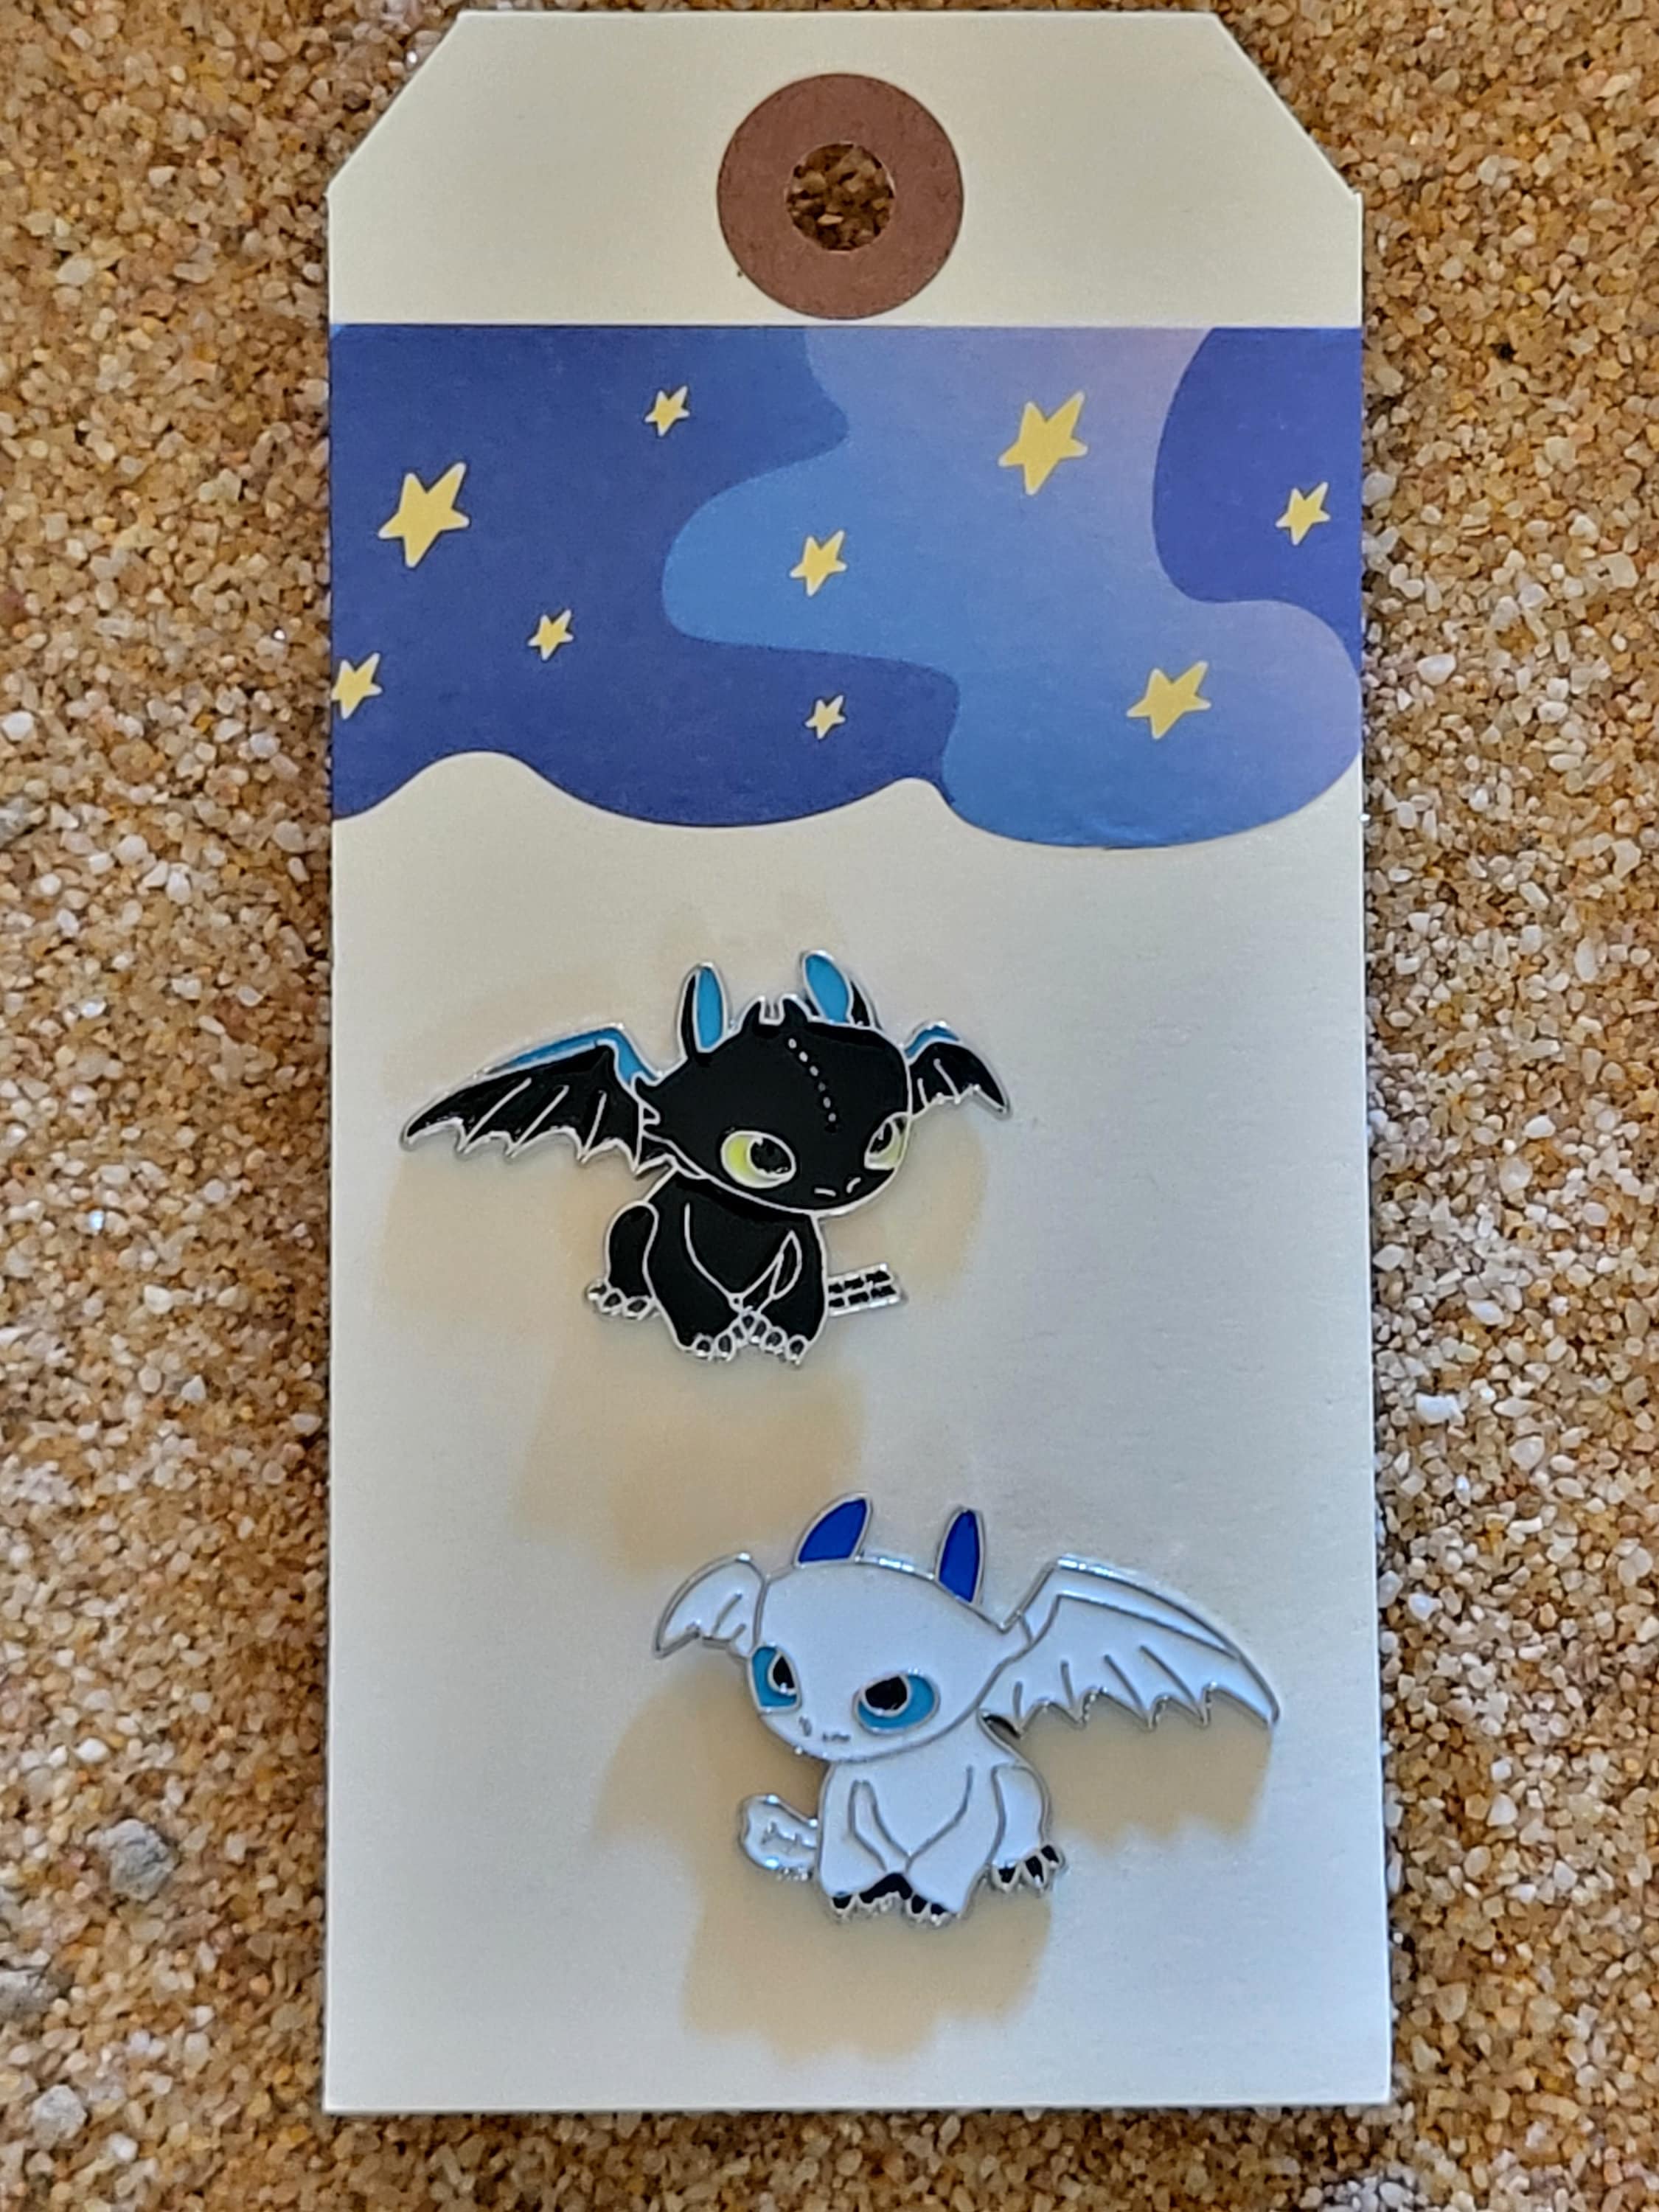 How to Train your Dragon- Toothless Hard Enamel Pin For Clothes, Backpacks